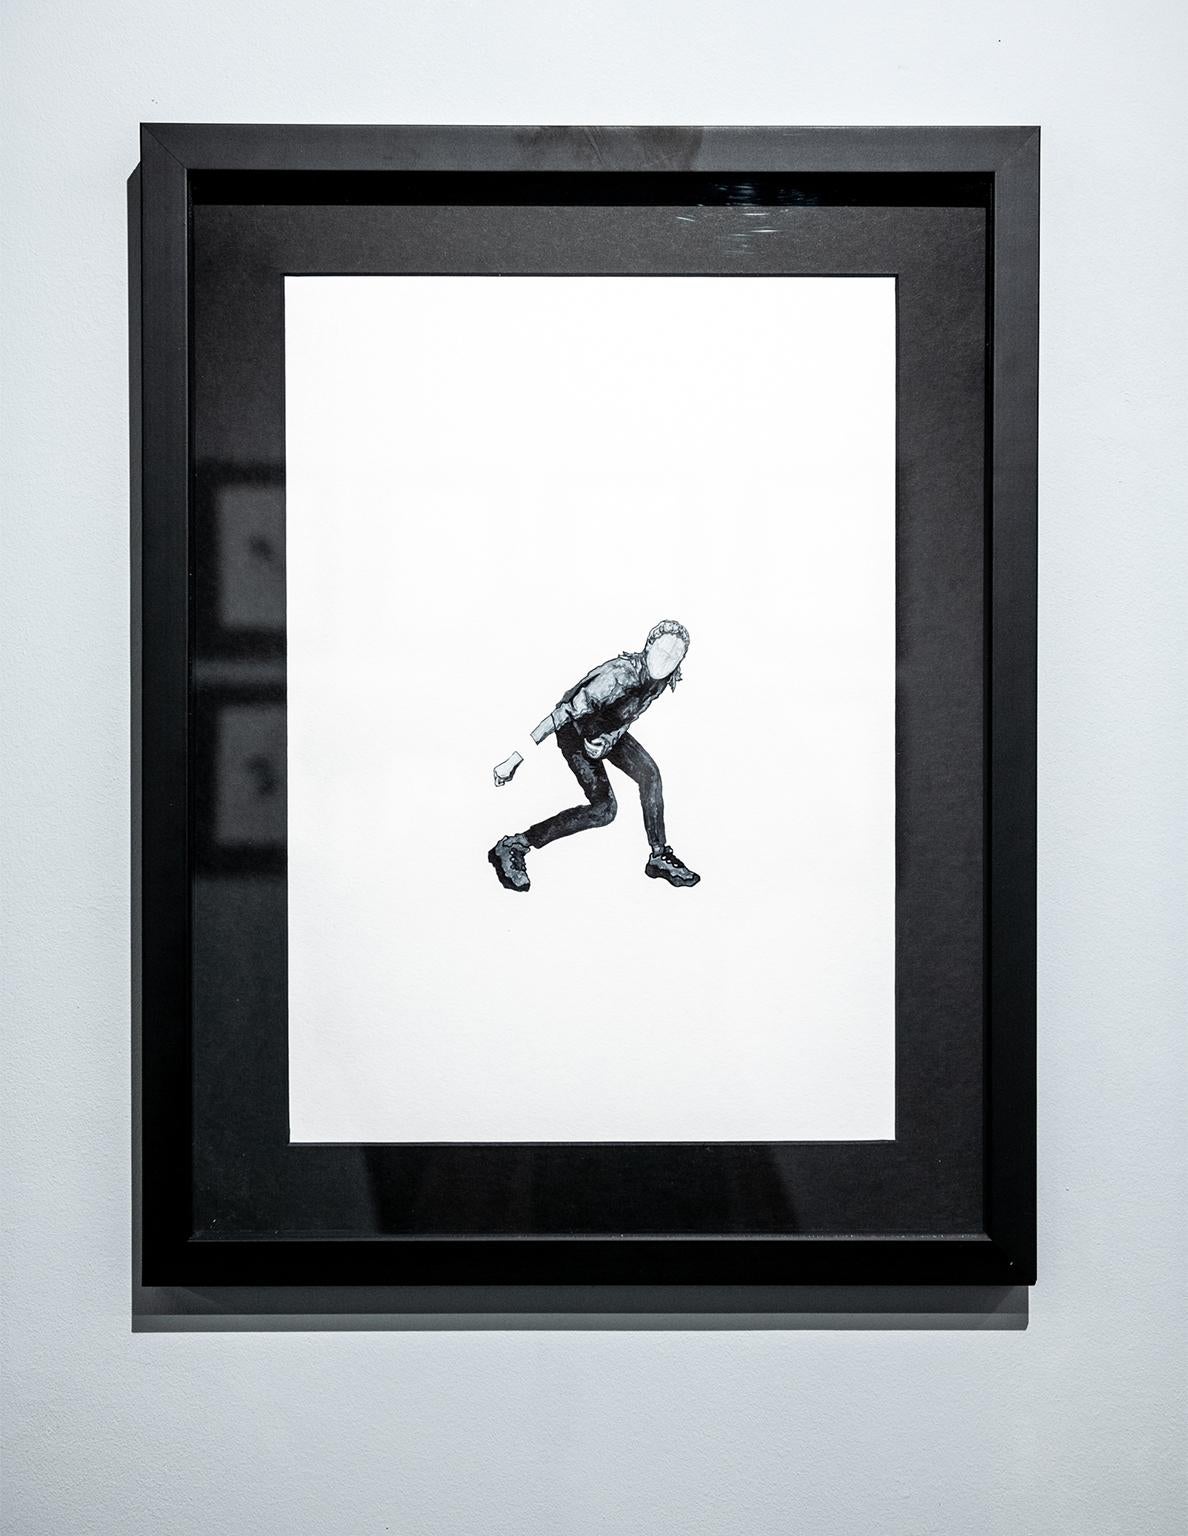 Unstable single-person protest - Contemporary Black and White Watercolor Drawing - Art by Evgeny Granilshchikov